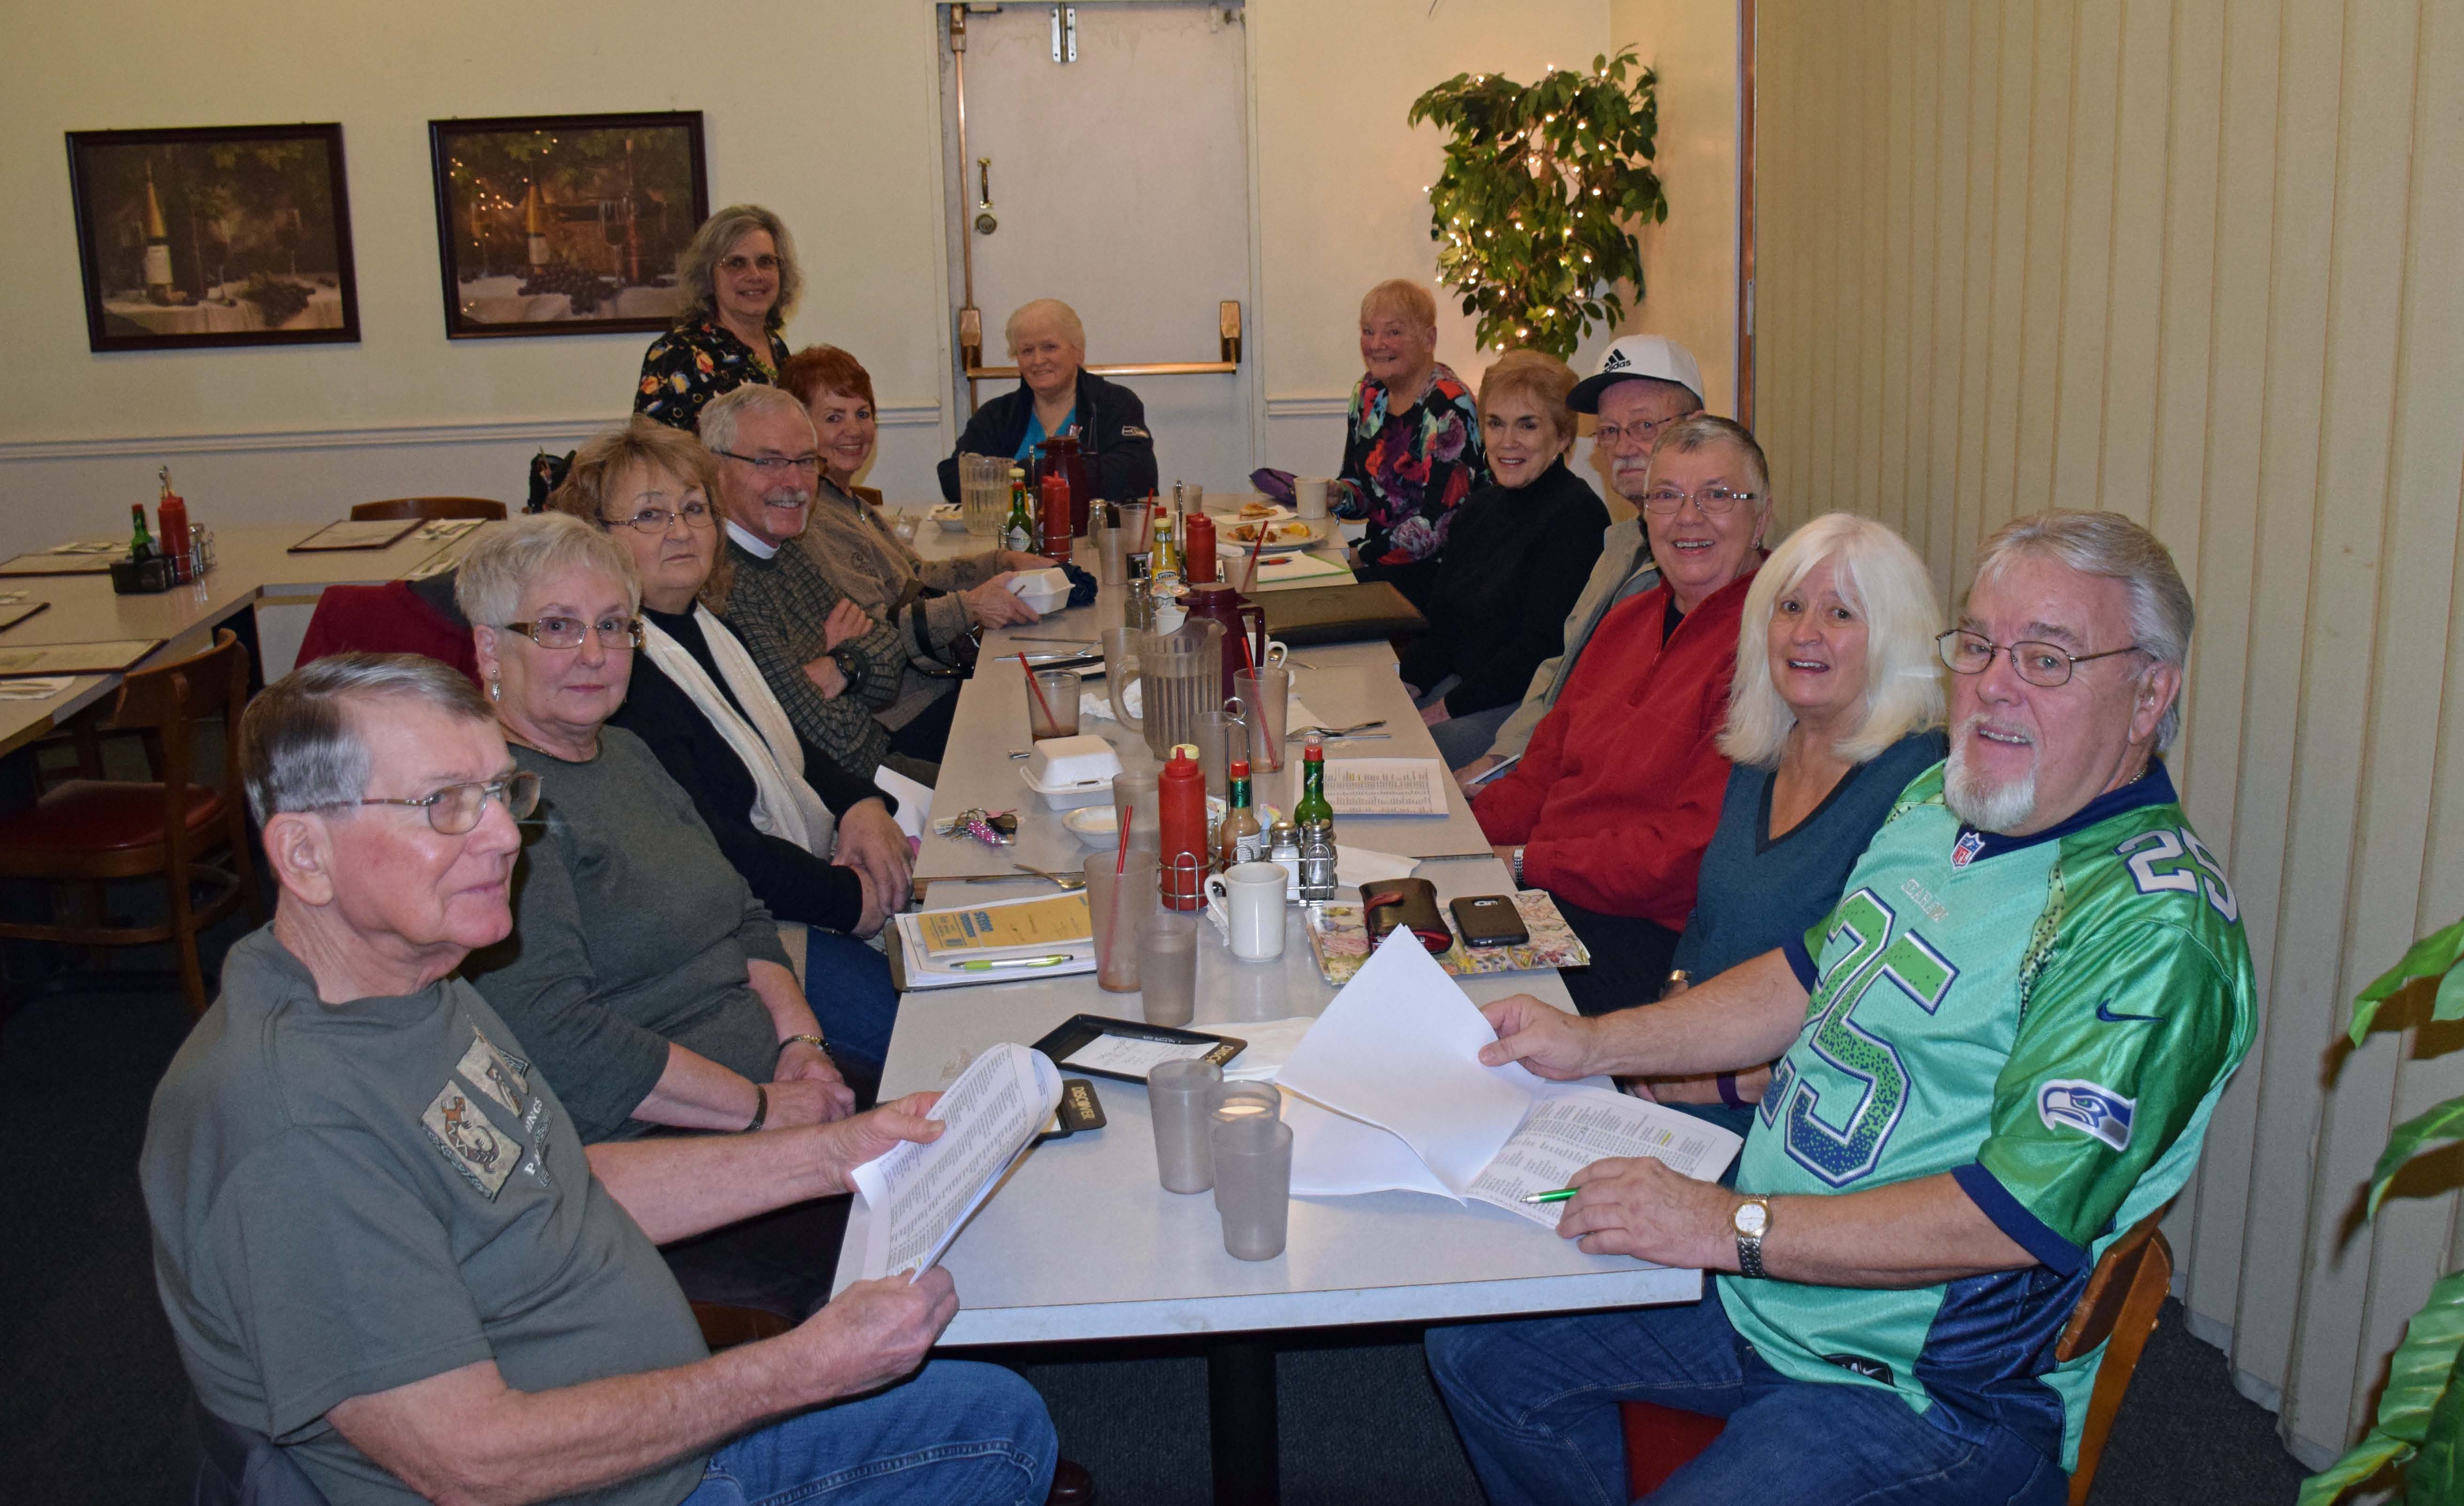 1/5 Reunion Committee Meeting -Dave Brown, Sherry Kent, Diane Evers, Joe Wingard, Mary Lou Younglove, Linda Spooner, Joan Rebman, Barb Pearson, Carol Burnett, Bruce Hilderman, Julie Larson, Fran Clifton, Brian SCHOENING - picture by Laurie Somers